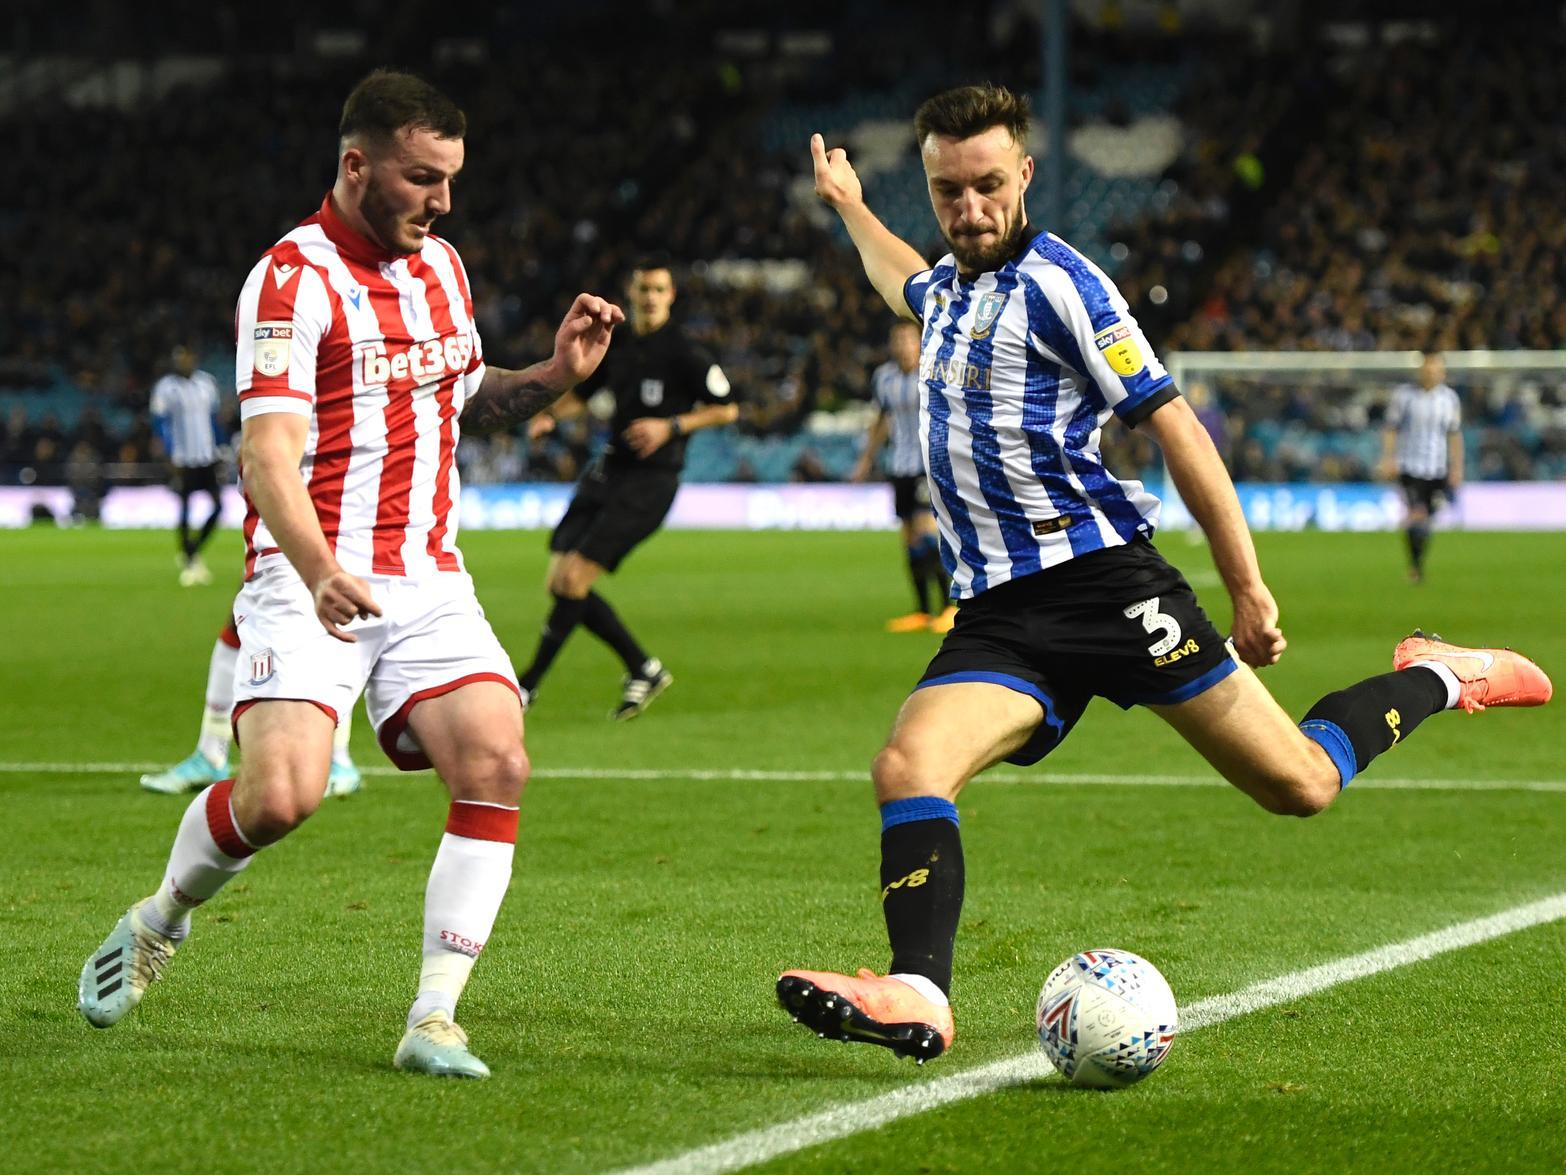 Sheffield Wednesday defender Morgan Fox, who won the club's Player of the Month award for October, has claimed that his future with the Owls beyond this season is out of his hands. (Sheffield Star)